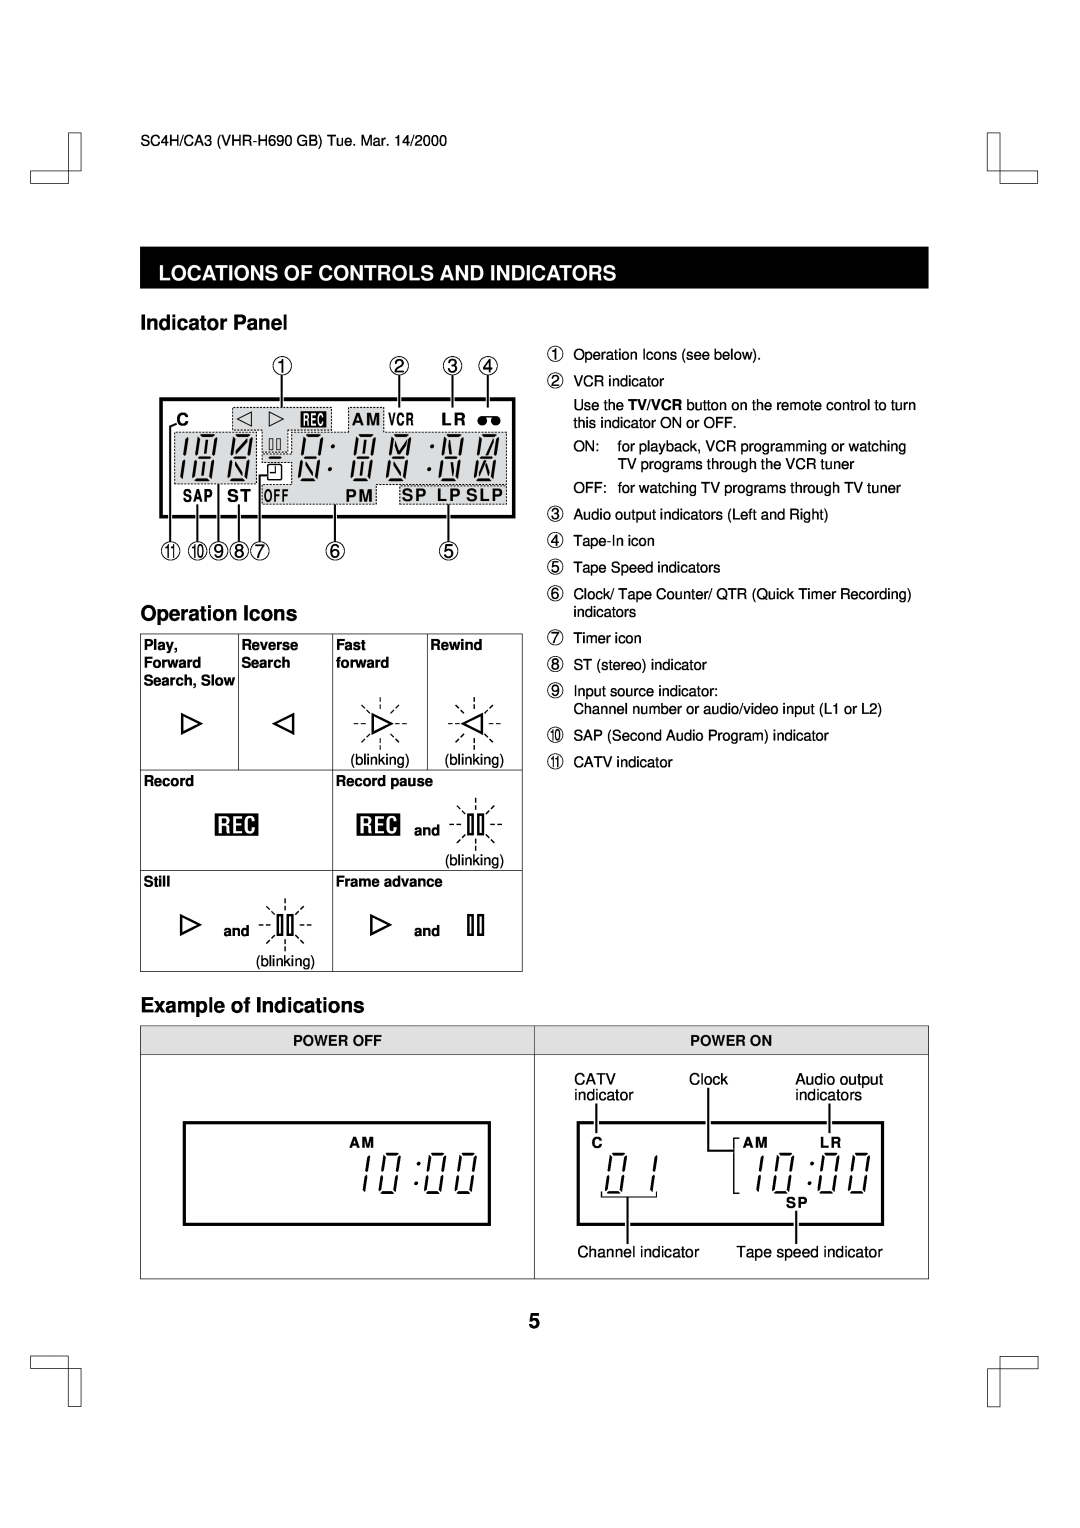 Sanyo VHR-H690 Locations Of Controls And Indicators, Indicator Panel, G F987, Operation Icons, Example of Indications 